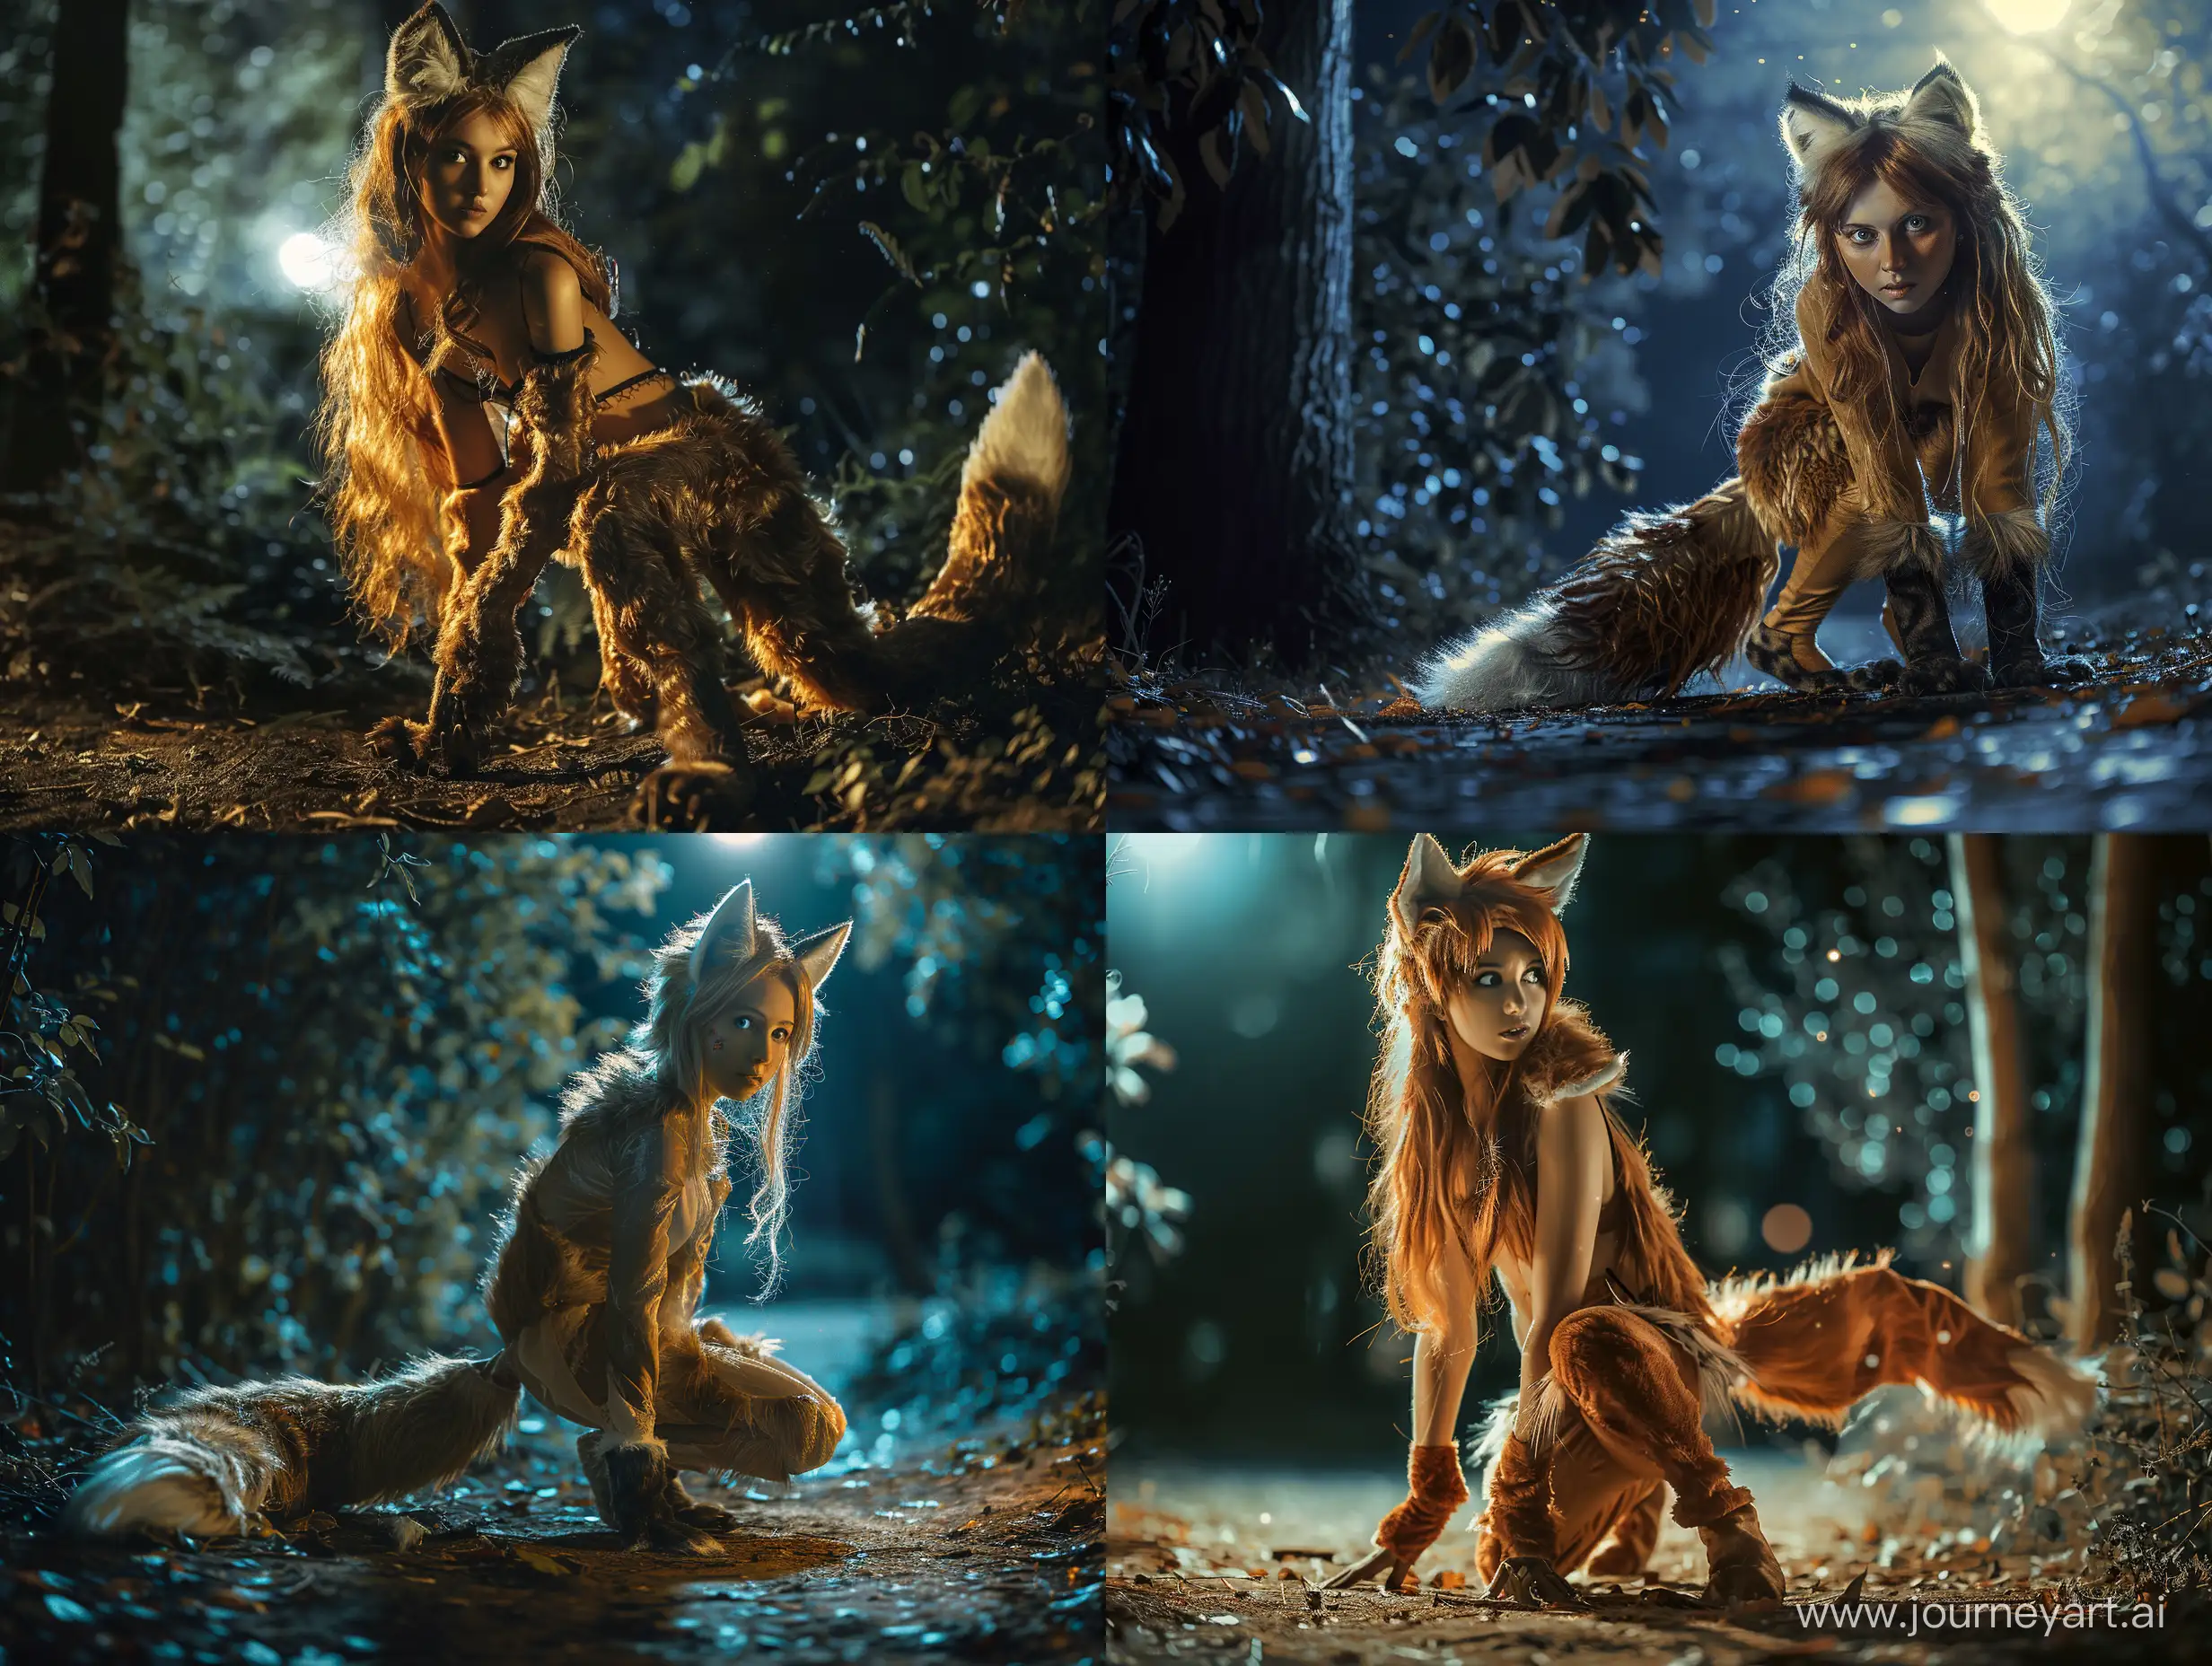 Enchanting-Transformation-Young-Woman-Becomes-a-Fox-in-Moonlit-Forest